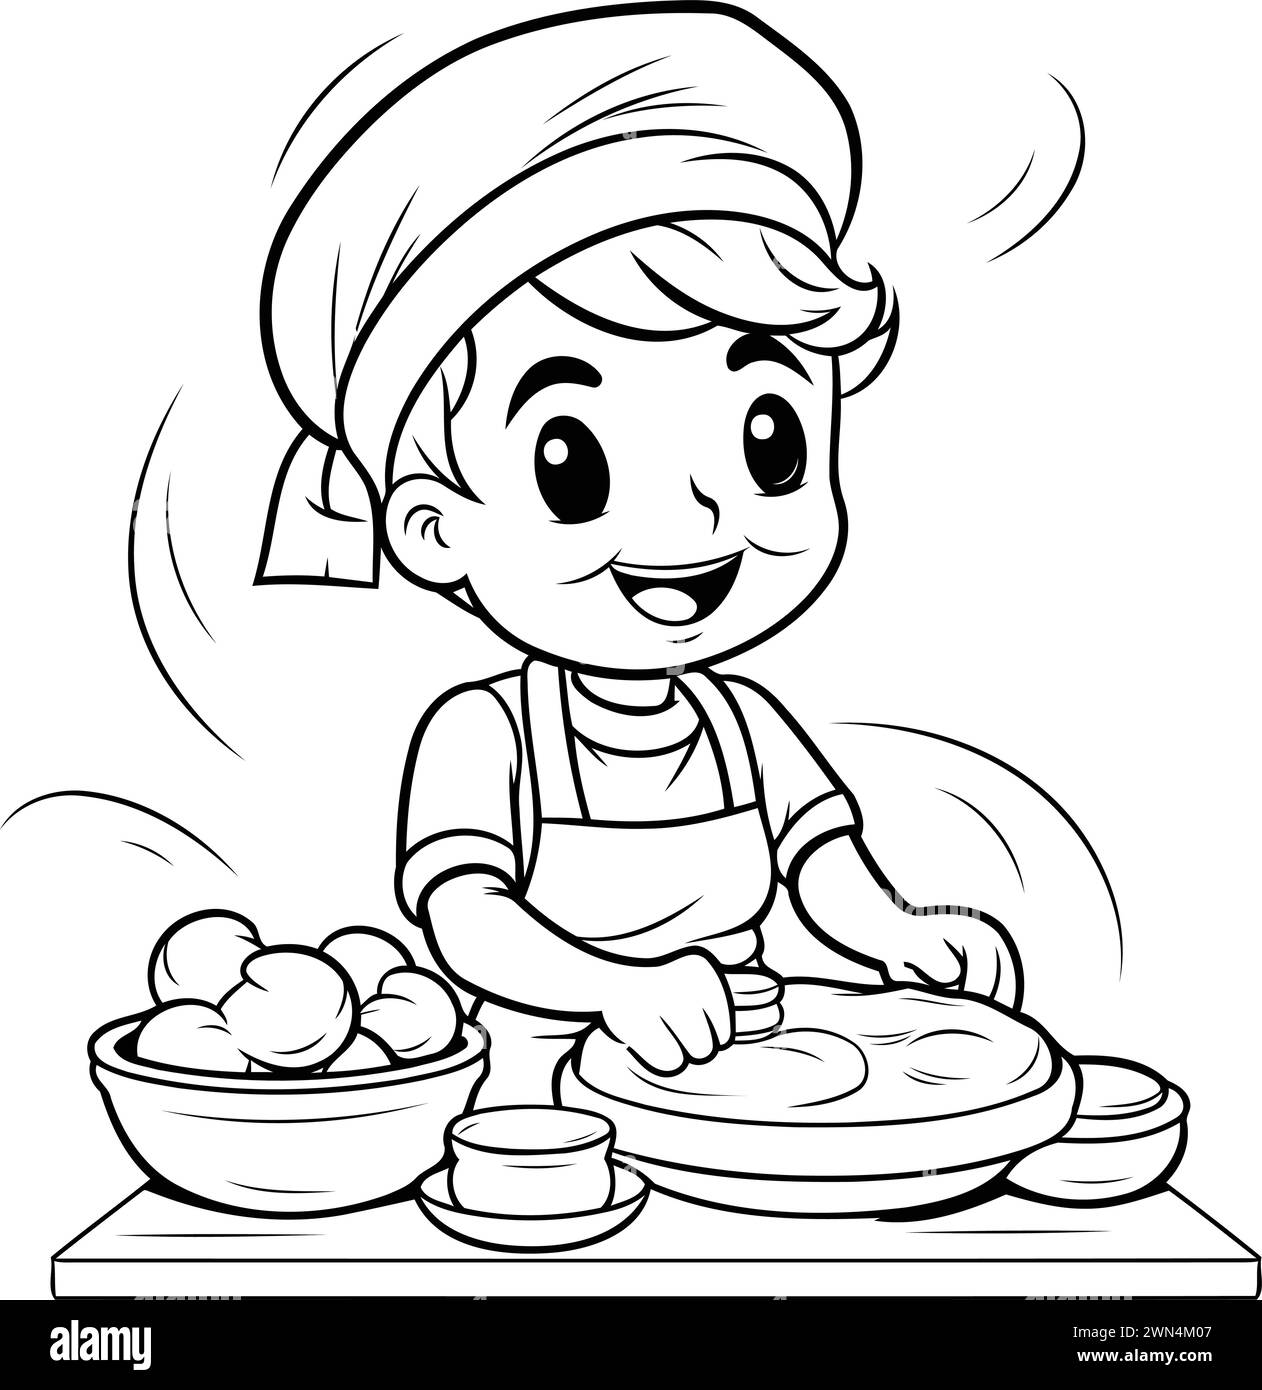 Black and White Cartoon Illustration of Cute Little Boy Cooking Food for Coloring Book Stock Vector